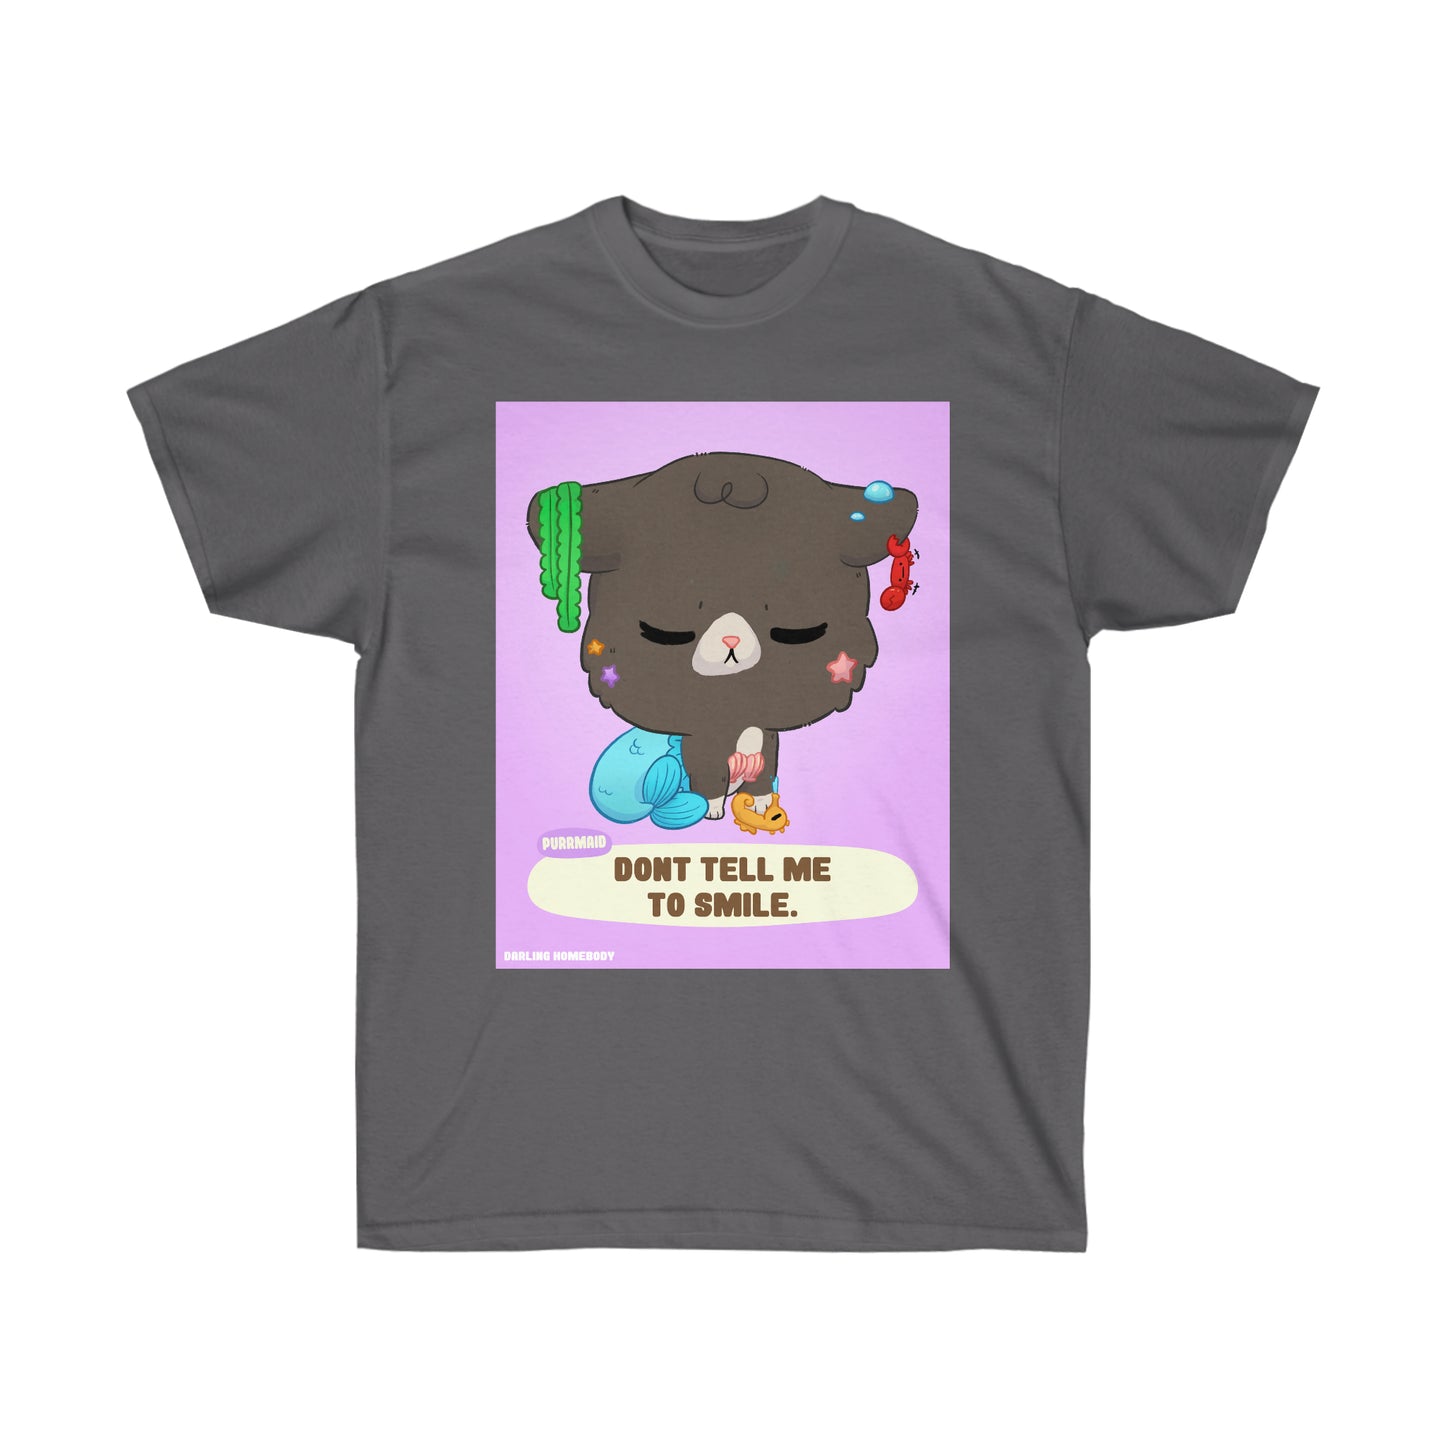 Dont Tell Me to Smile Unisex Ultra Cotton Tee.